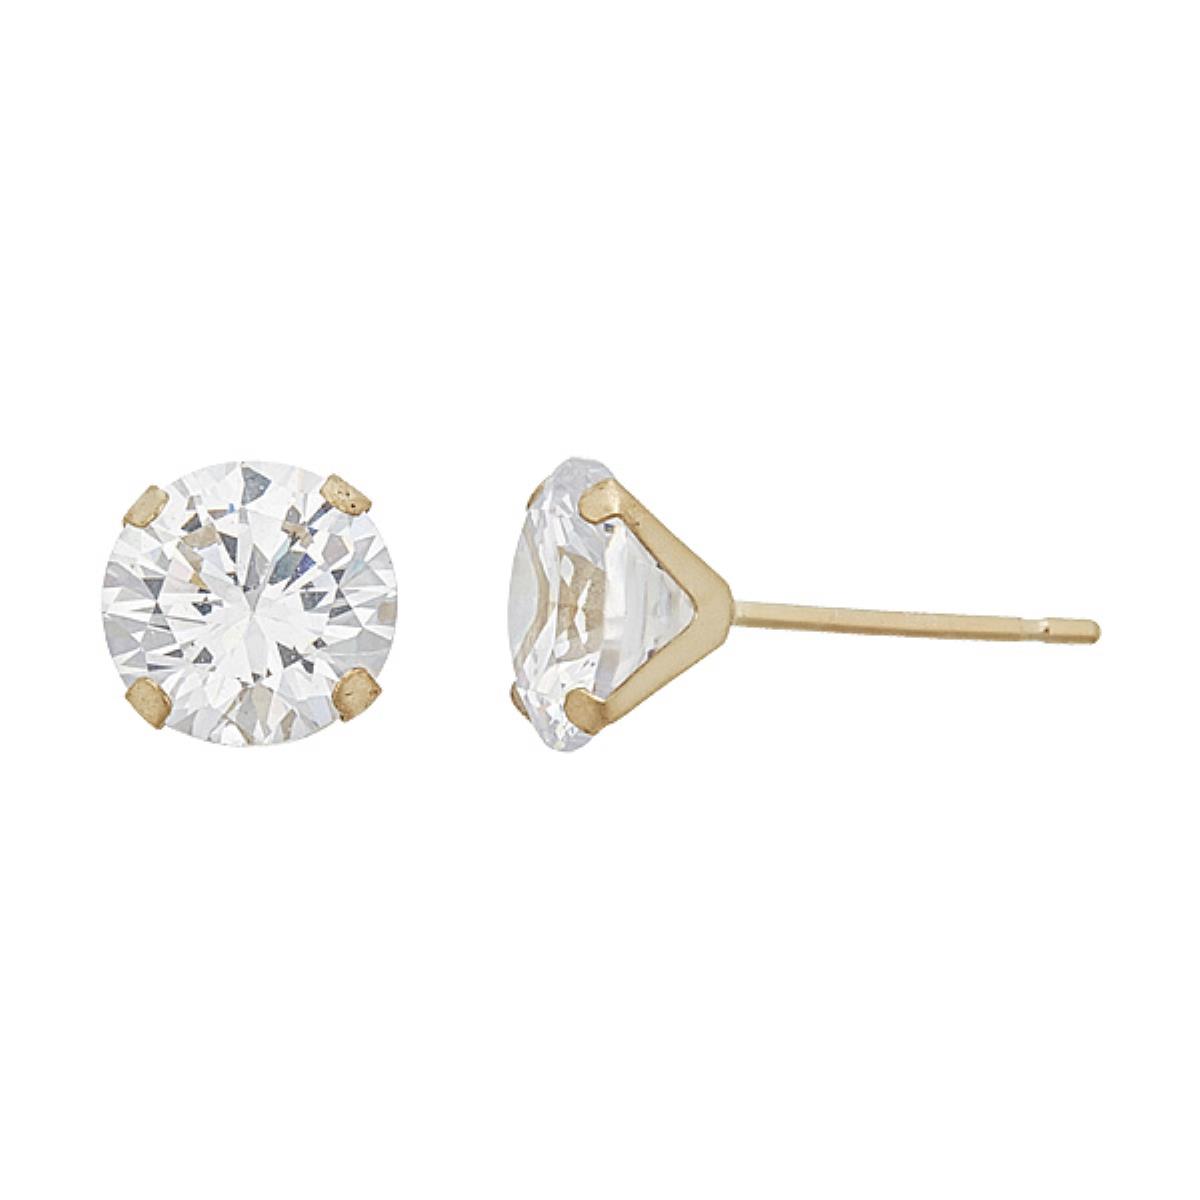 10K Yellow Gold 7mm Martini Round Cut Solitaire Stud Earring